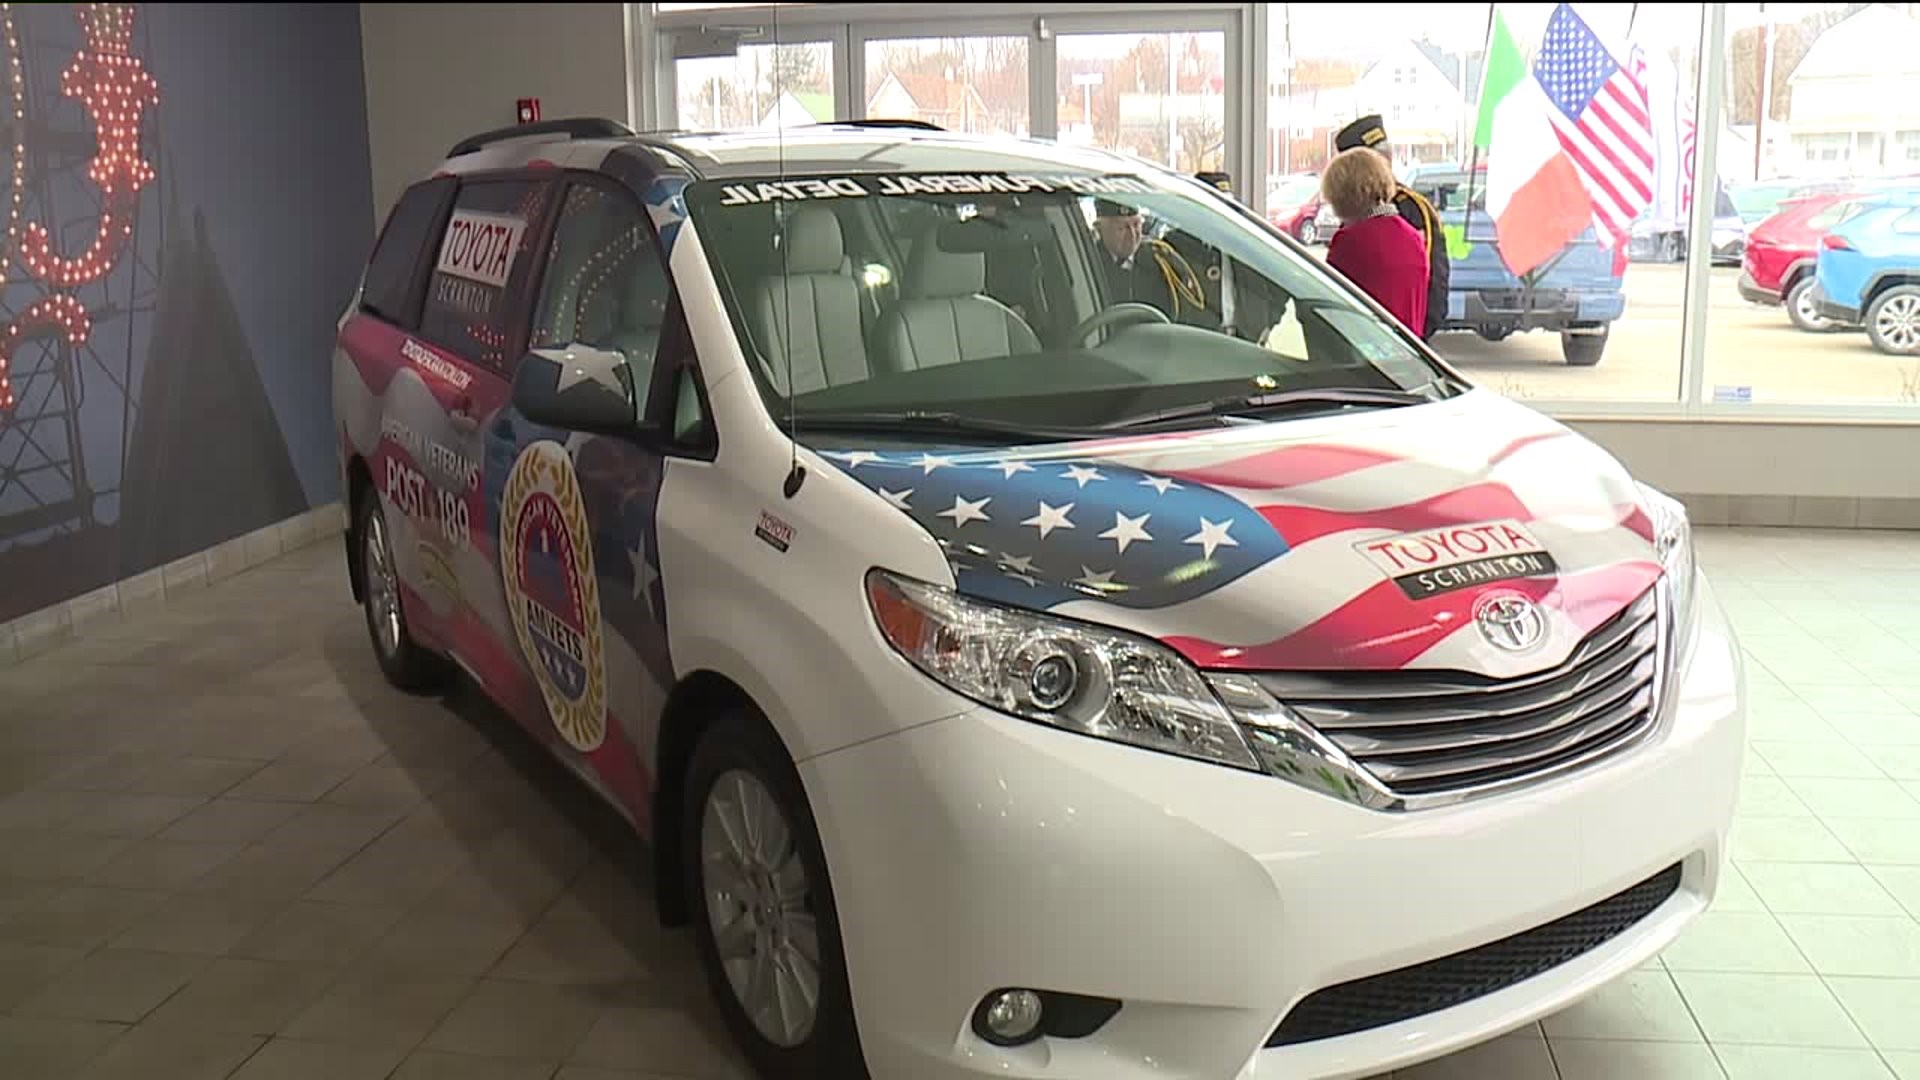 New Vehicle to Honor the Honor Guard